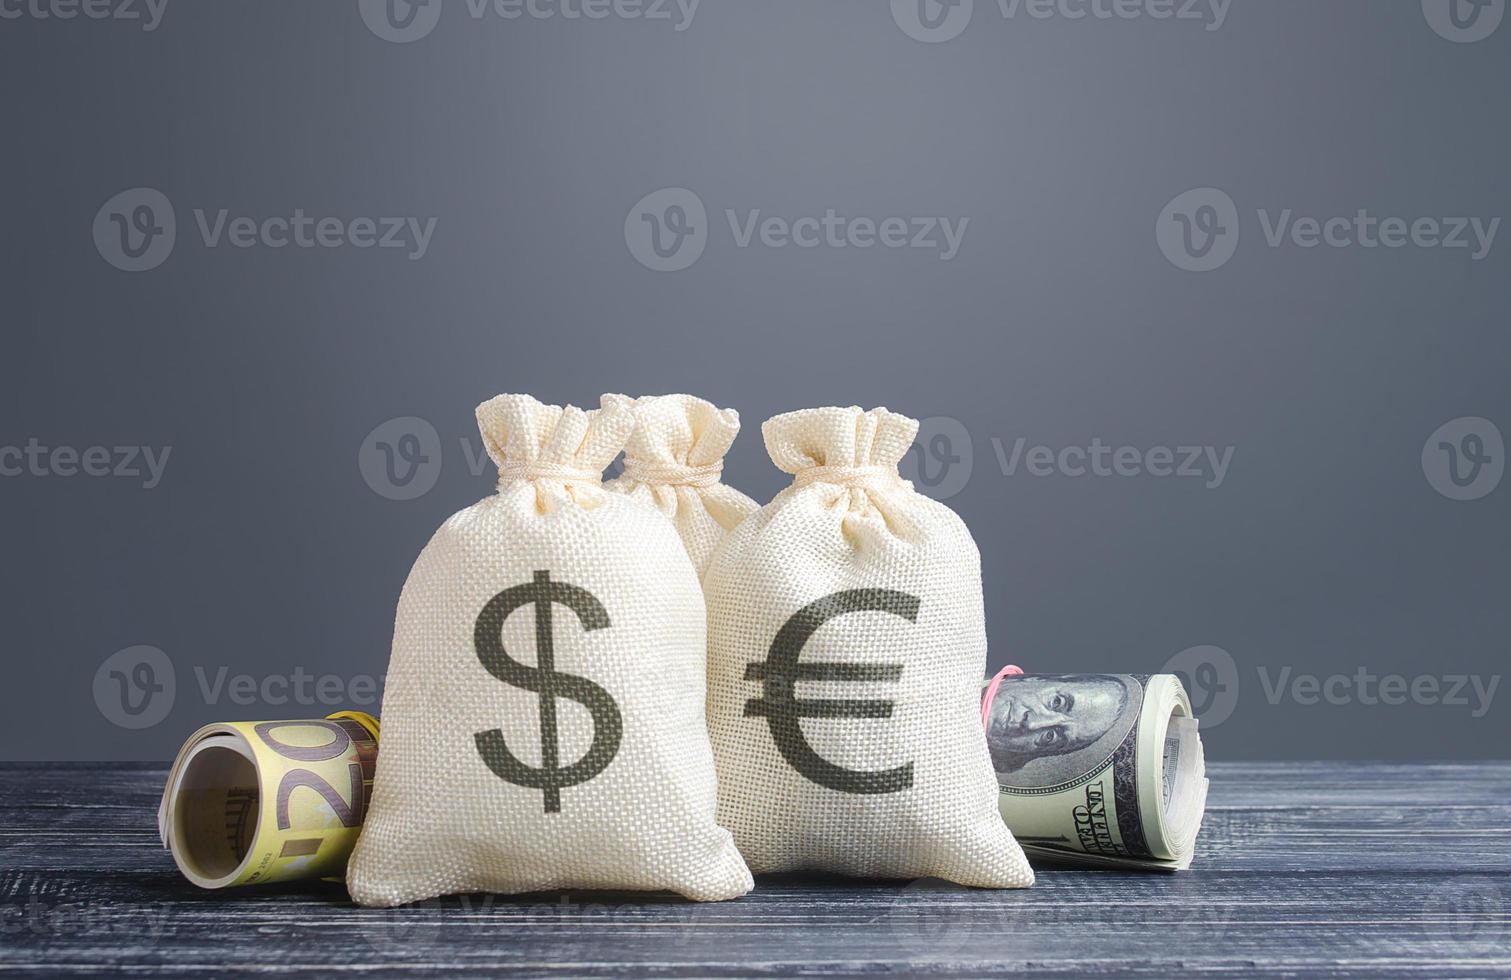 Money bags and world currencies. Capital investment, savings. Economics, lending business. Profit income, dividends payouts. Crowdfunding startups investing. Banking service, budget monetary policy photo